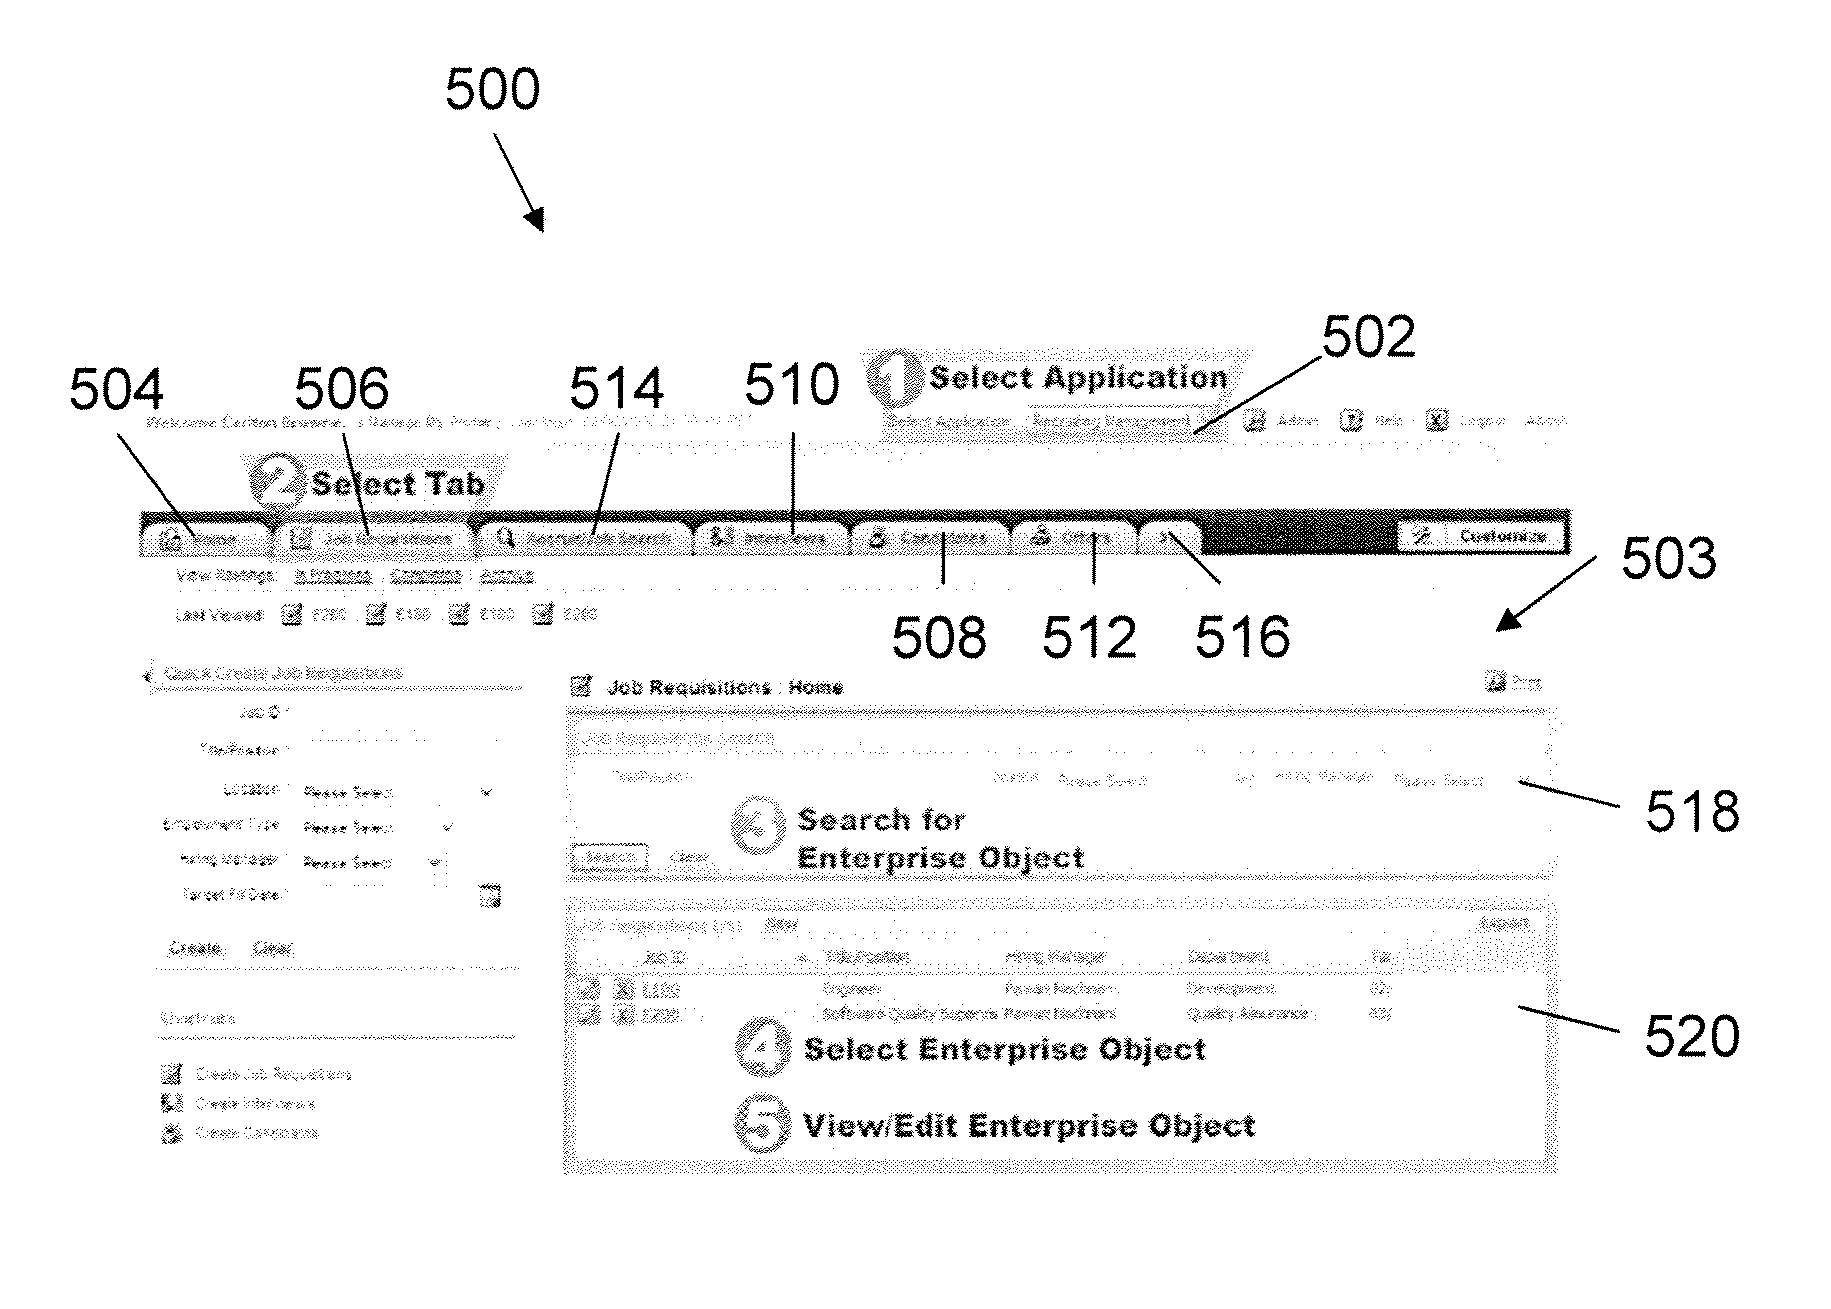 Apparatus and method for linking objects created in a rapid application development environment